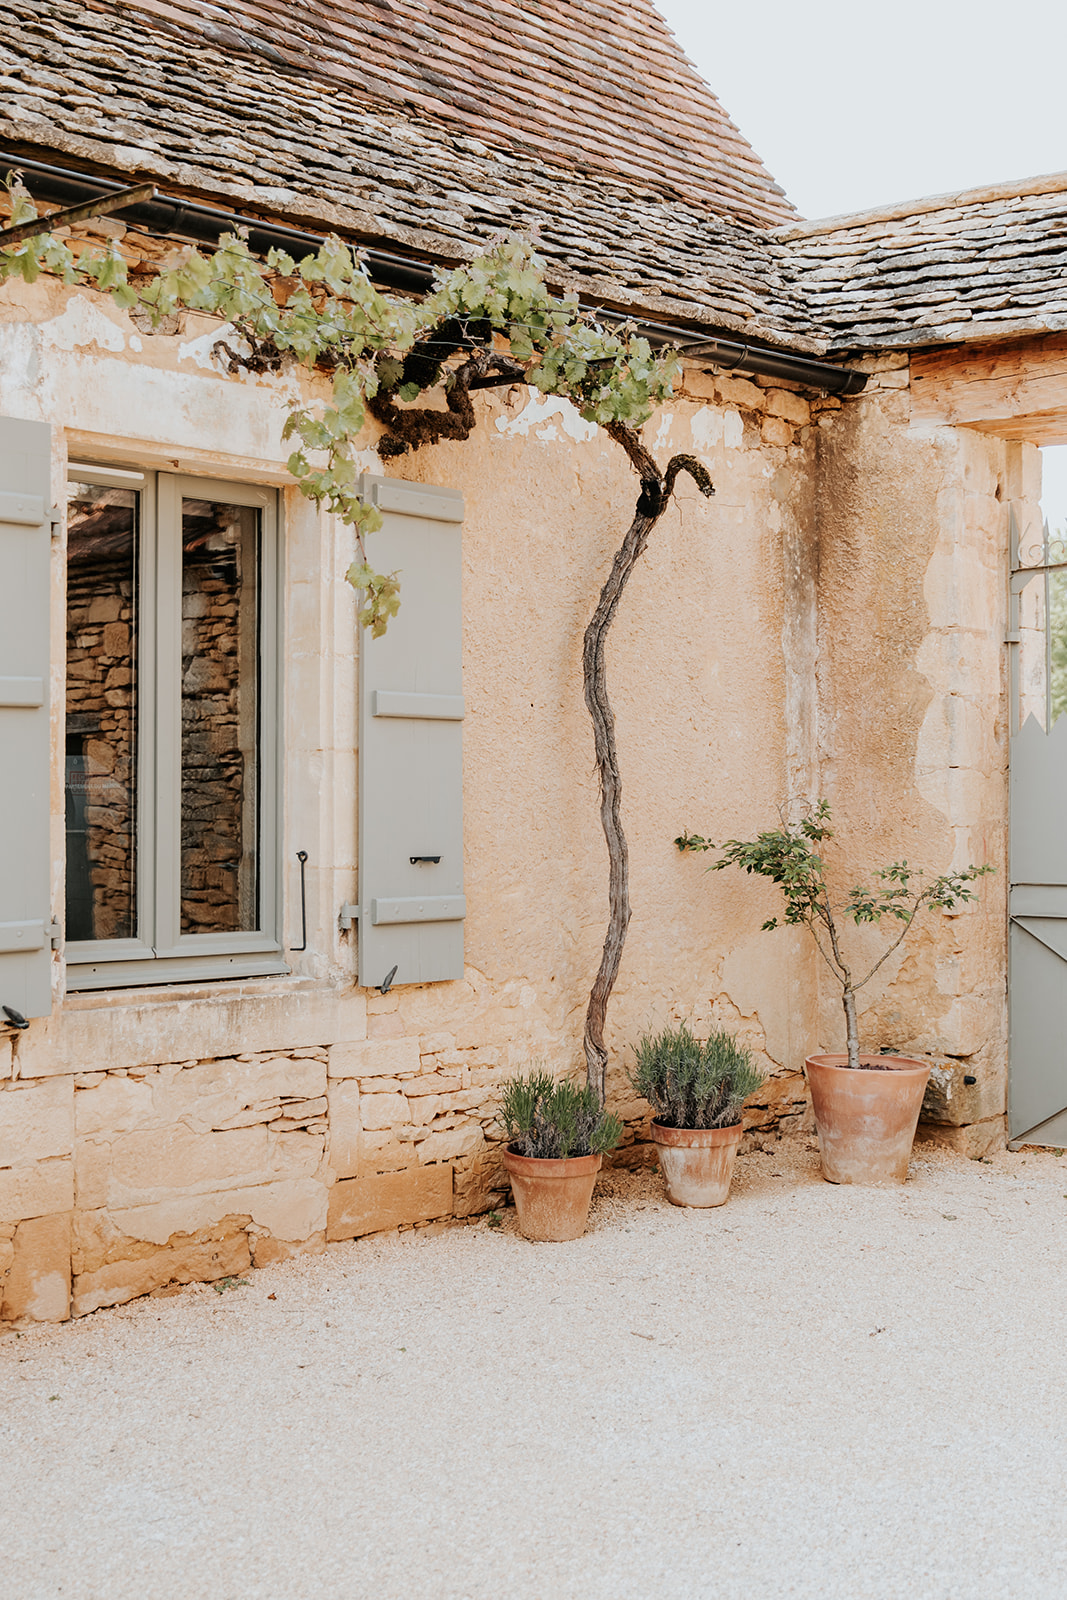 18th century farmhouse in Dordogne region, entirely renovated, charming guest rooms